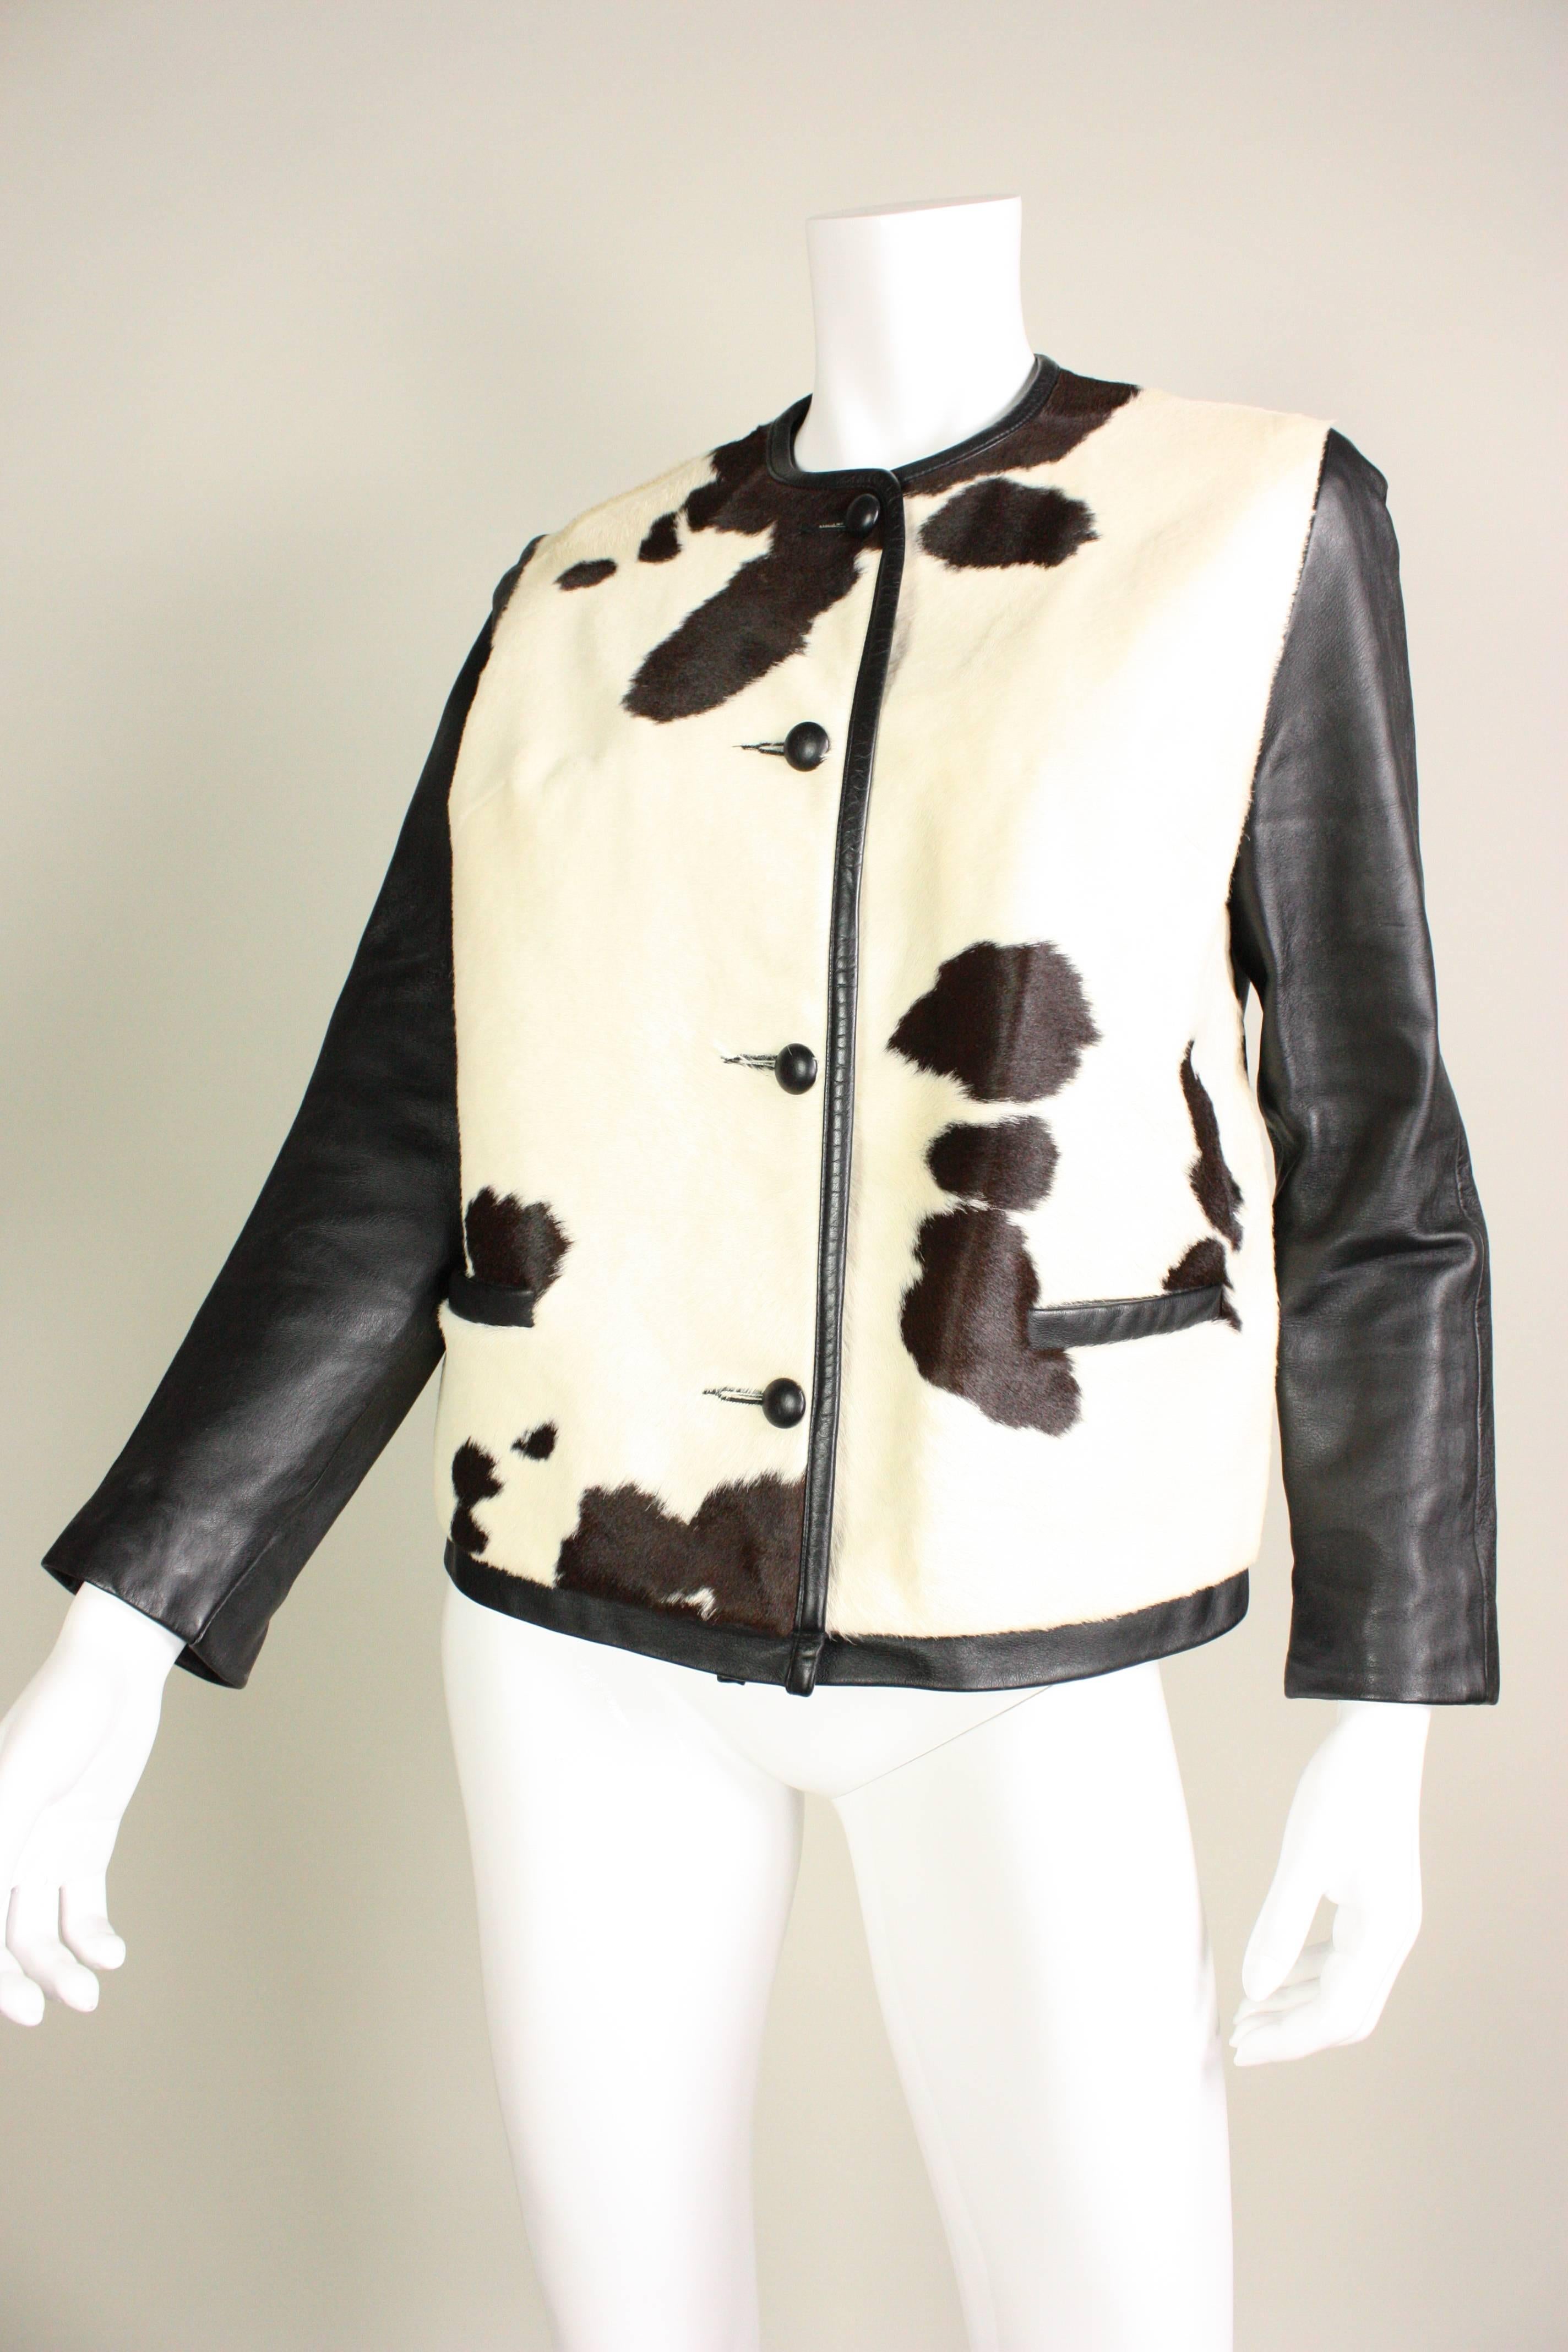 Vintage mod jacket dates to the 1960's and features a spotted cowhide front and black leather back and sleeves.  Black leather buttons and trim.  Fully lined.  Center front button closure.  Matching mini handbag.

Measurements-
Bust: 38